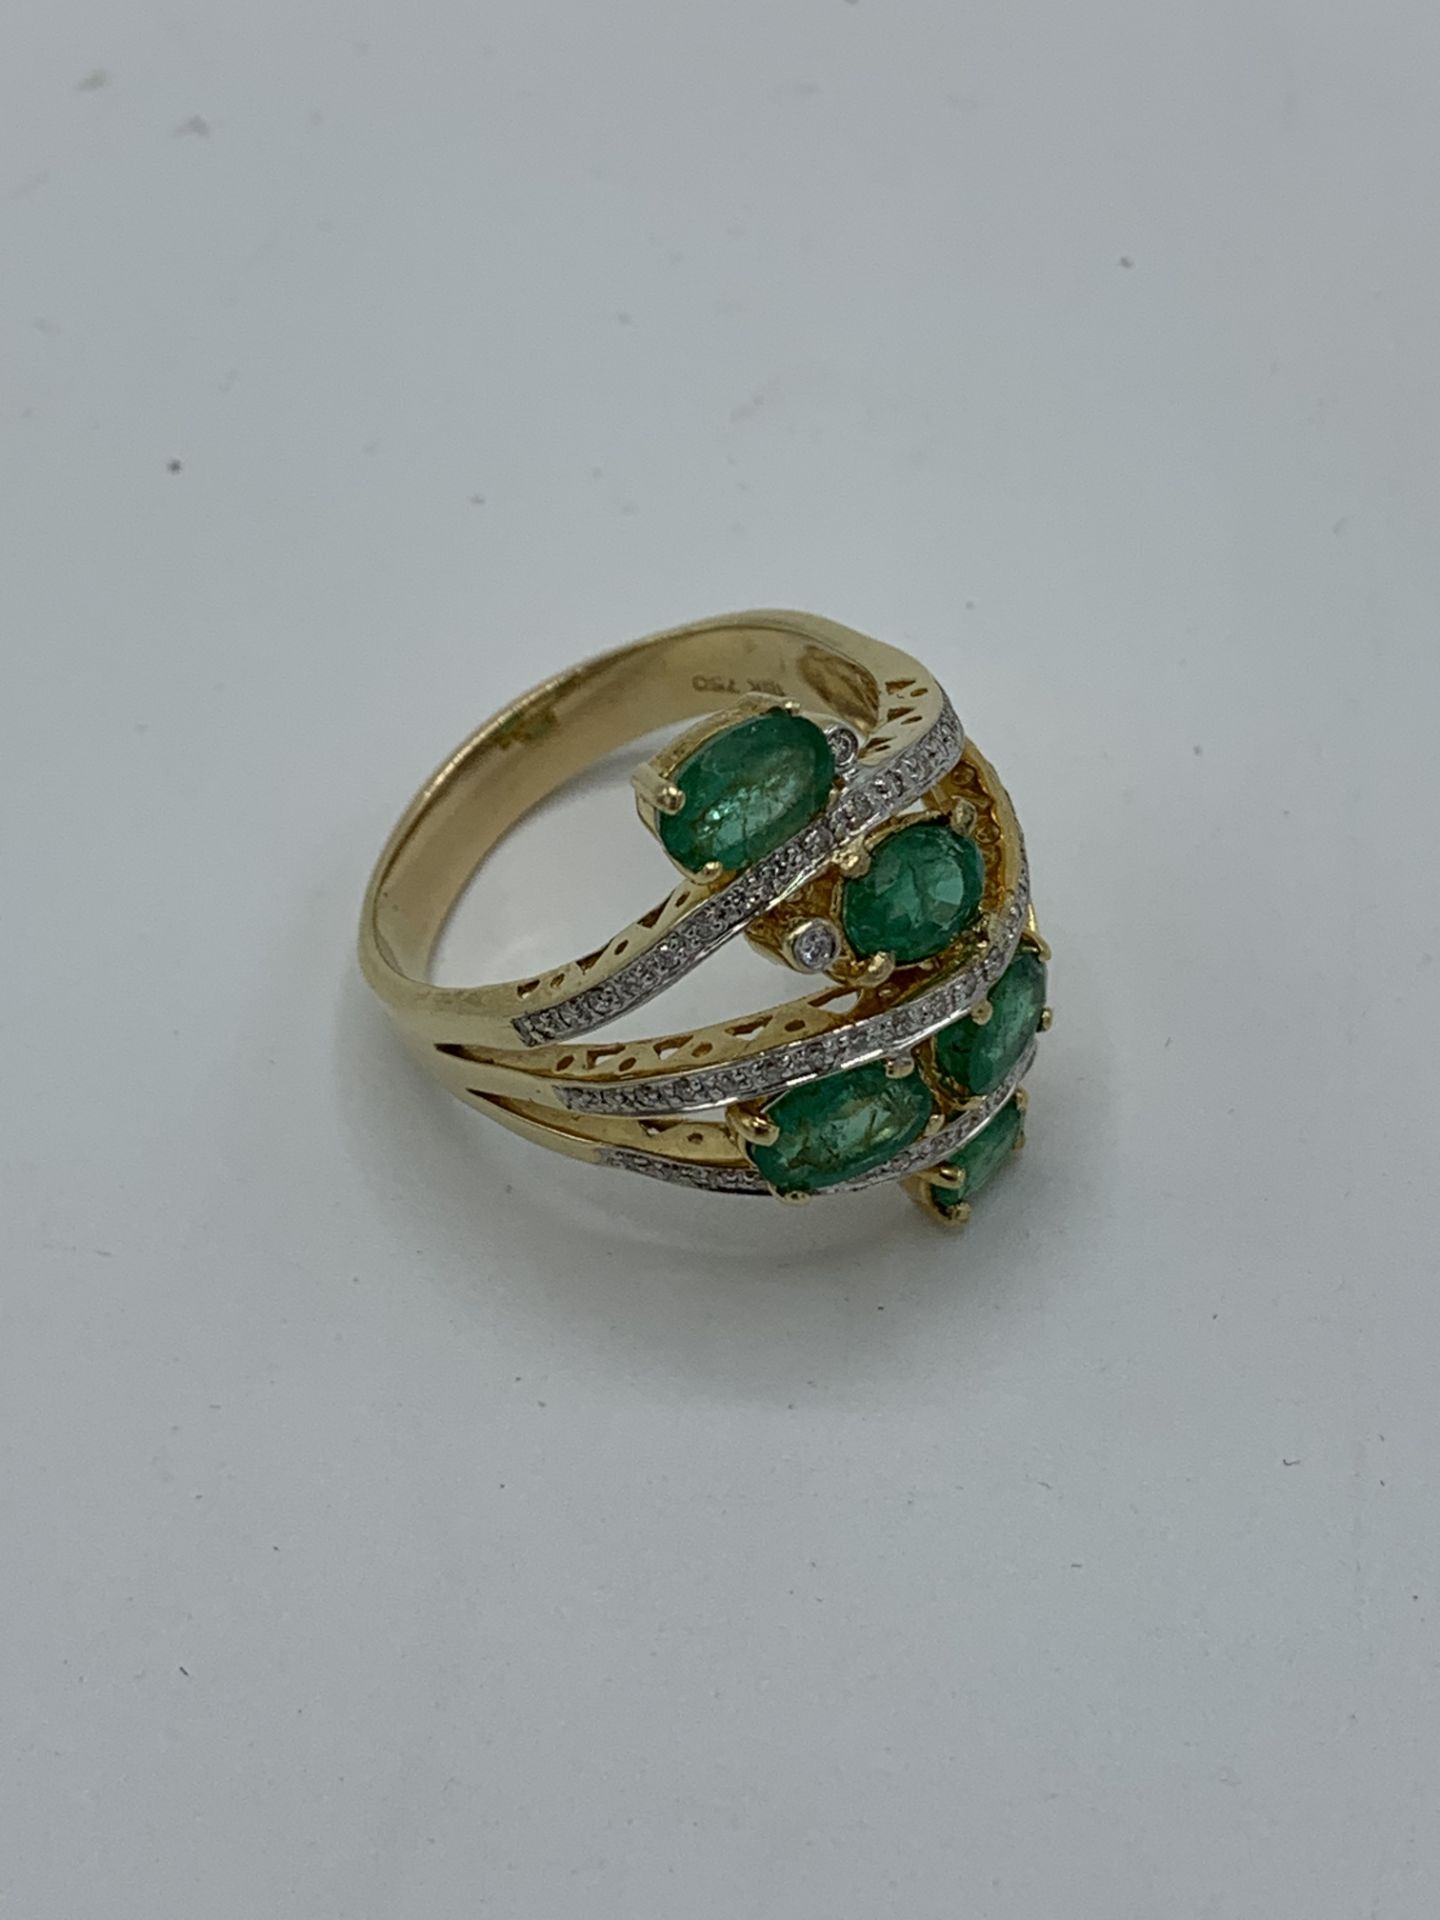 18ct gold 5 emerald and diamond ring, weight 12.3gms, size Y. Estimate £1000-1200.